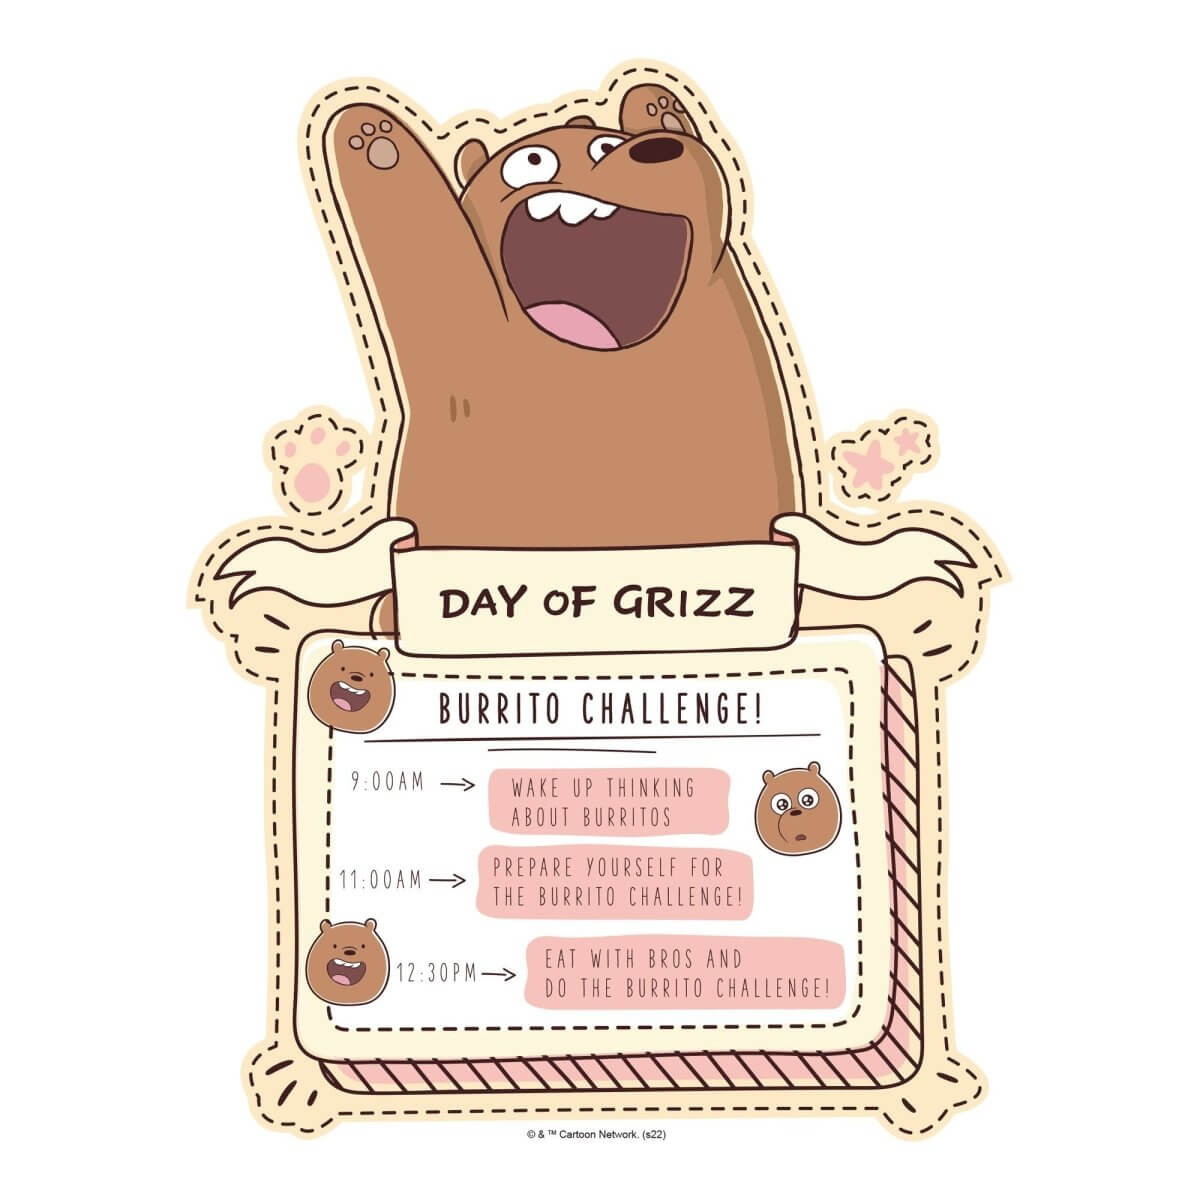 Kismet Decals Home & Room Decor We Bare Bears Grizz's Day Wall decal sticker - officially licensed - latex printed with no solvent odor - Kismet Decals